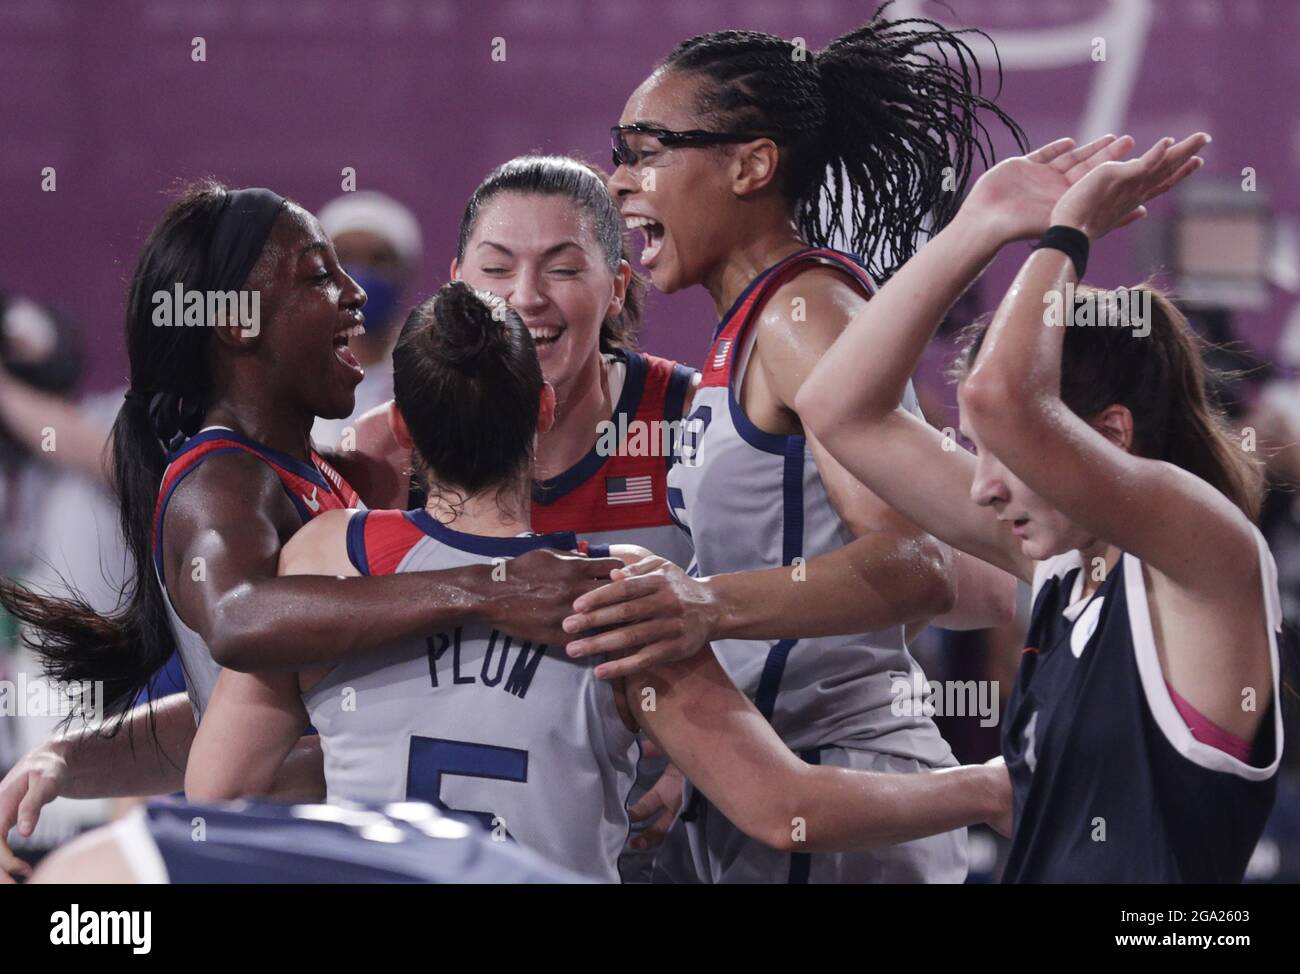 Tokyo, Japan. 28th July, 2021. USA players celebrate after defeating Team ROC in the Women's 3X3 Basketball gold medal game at the Tokyo Summer Olympics in Tokyo, Japan, on Wednesday, July 28, 2021. Photo by Bob Strong/UPI. Credit: UPI/Alamy Live News Stock Photo